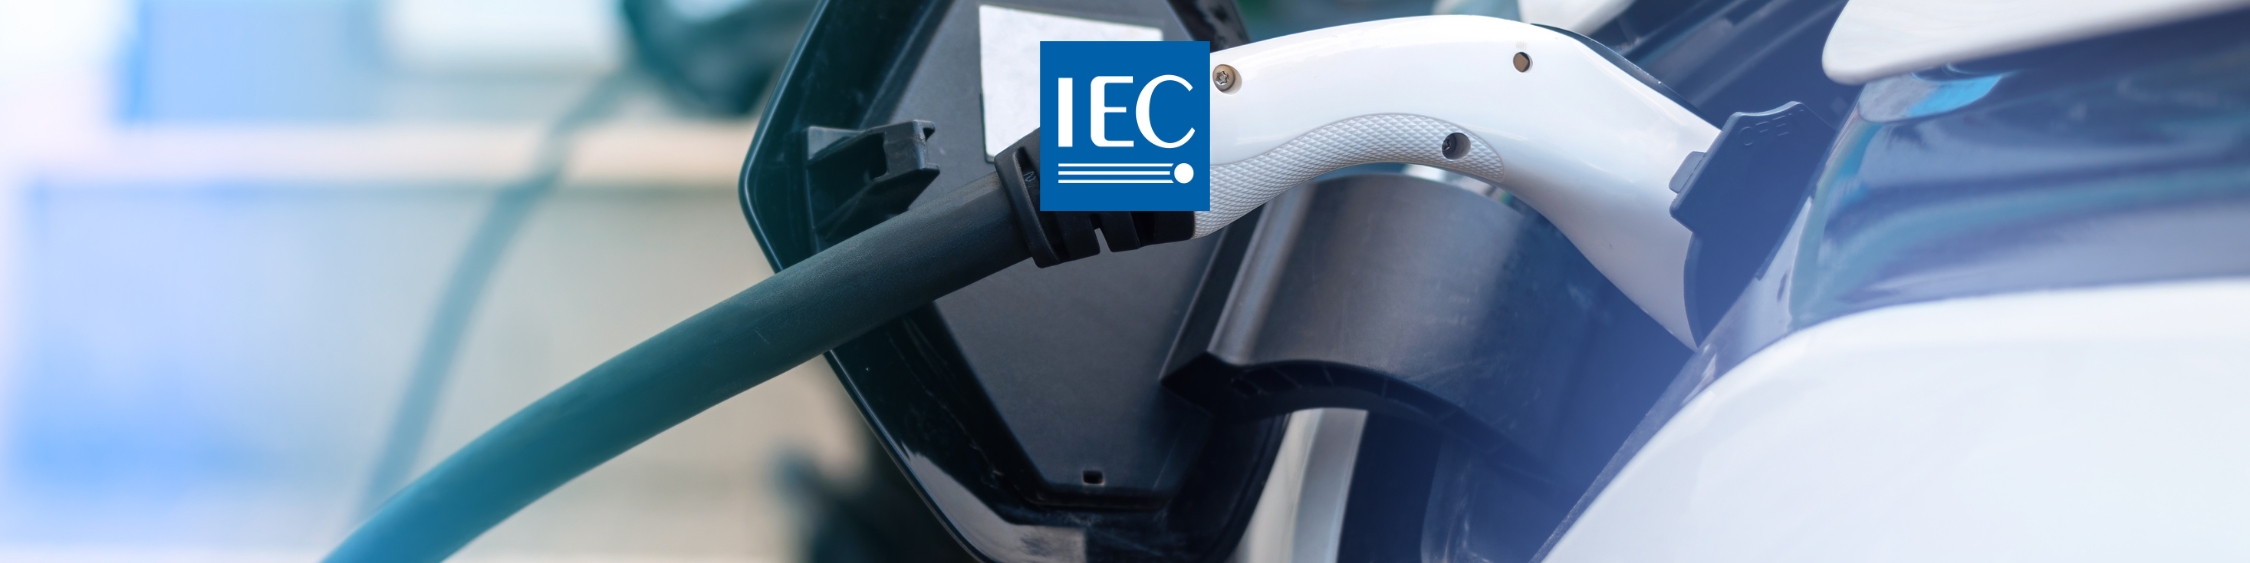 Stay Charged Up: Hiacc’s Battery Testing Chambers Ensure IEC 62133 & 62619 Compliance